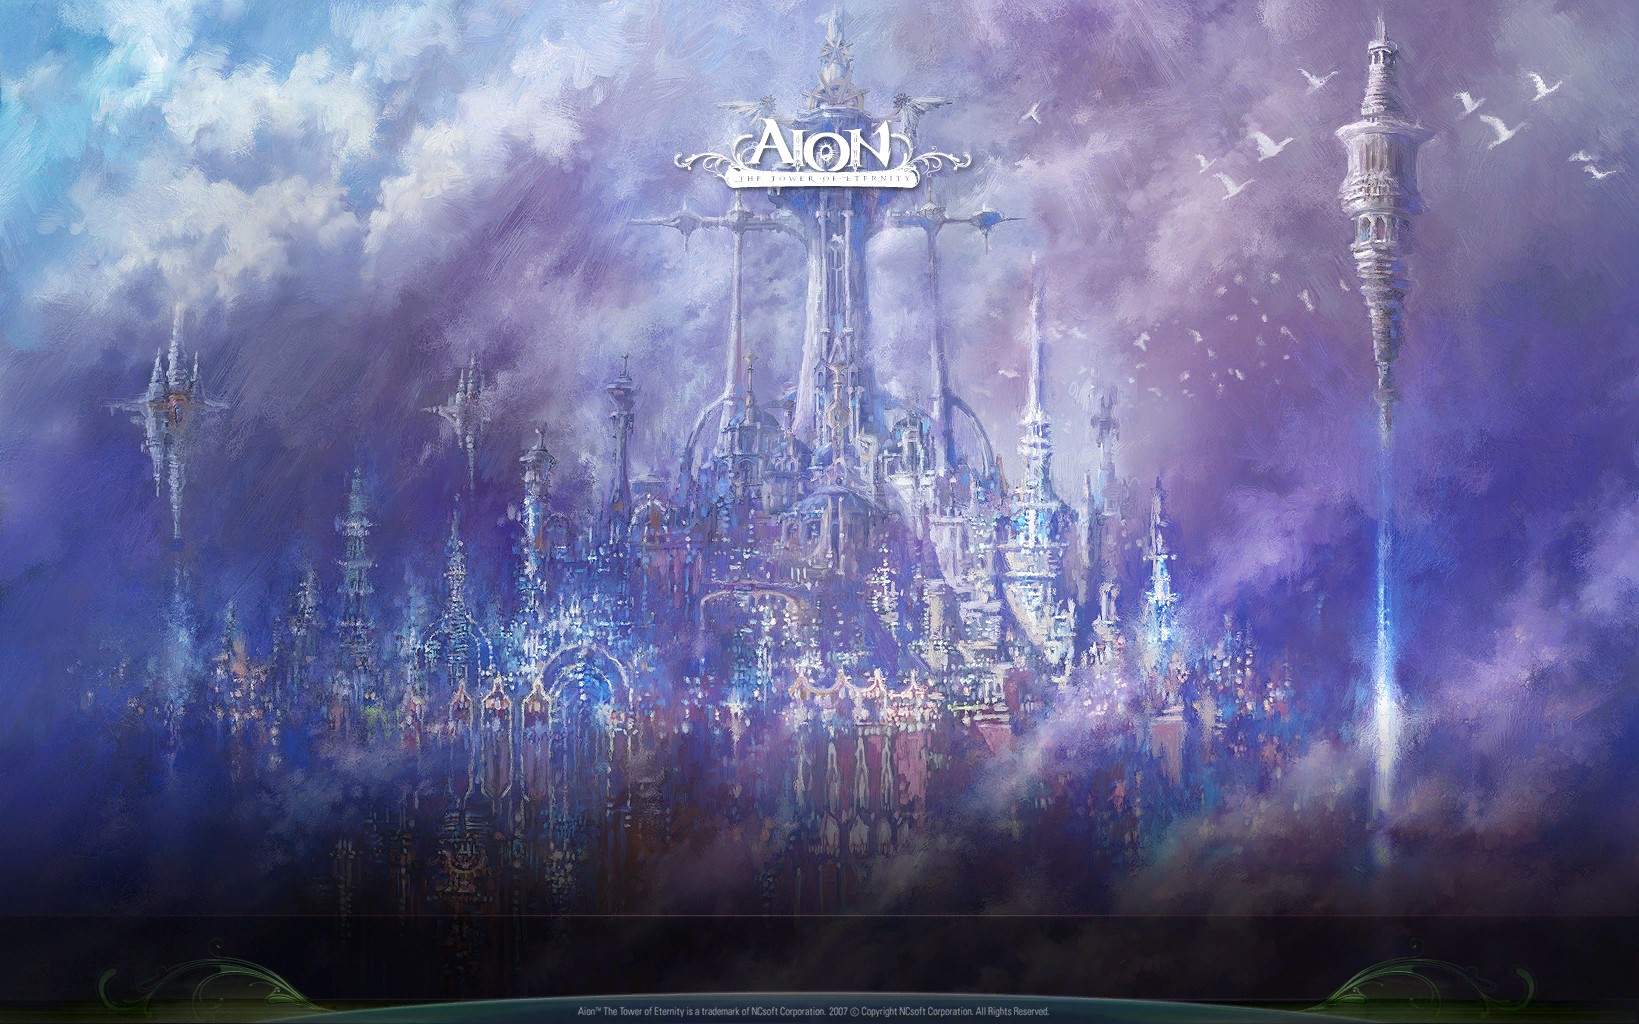 Aion Tower Of Eternity HD Wallpaper And Background Image